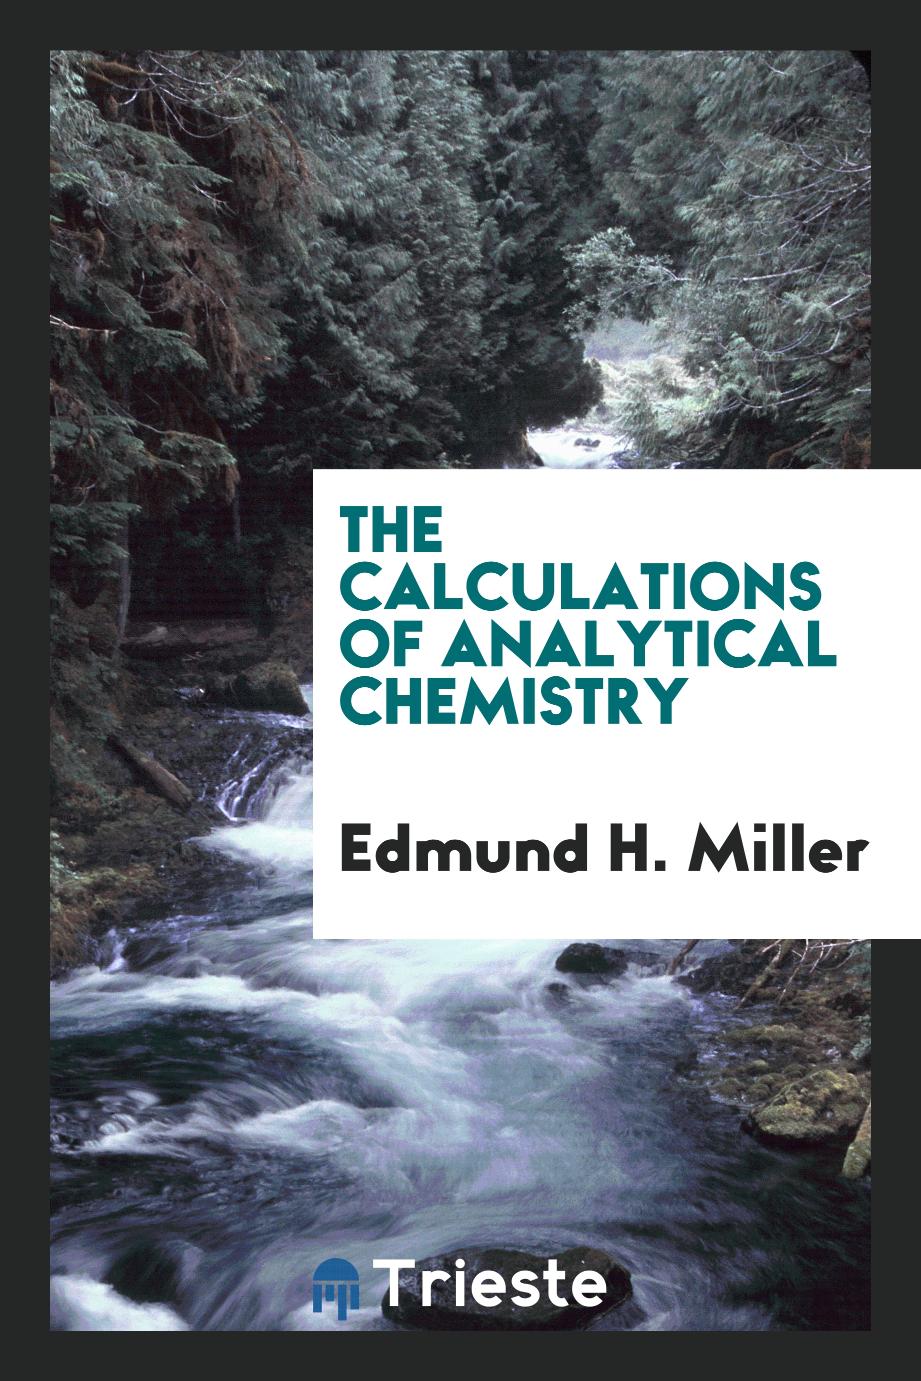 The calculations of analytical chemistry